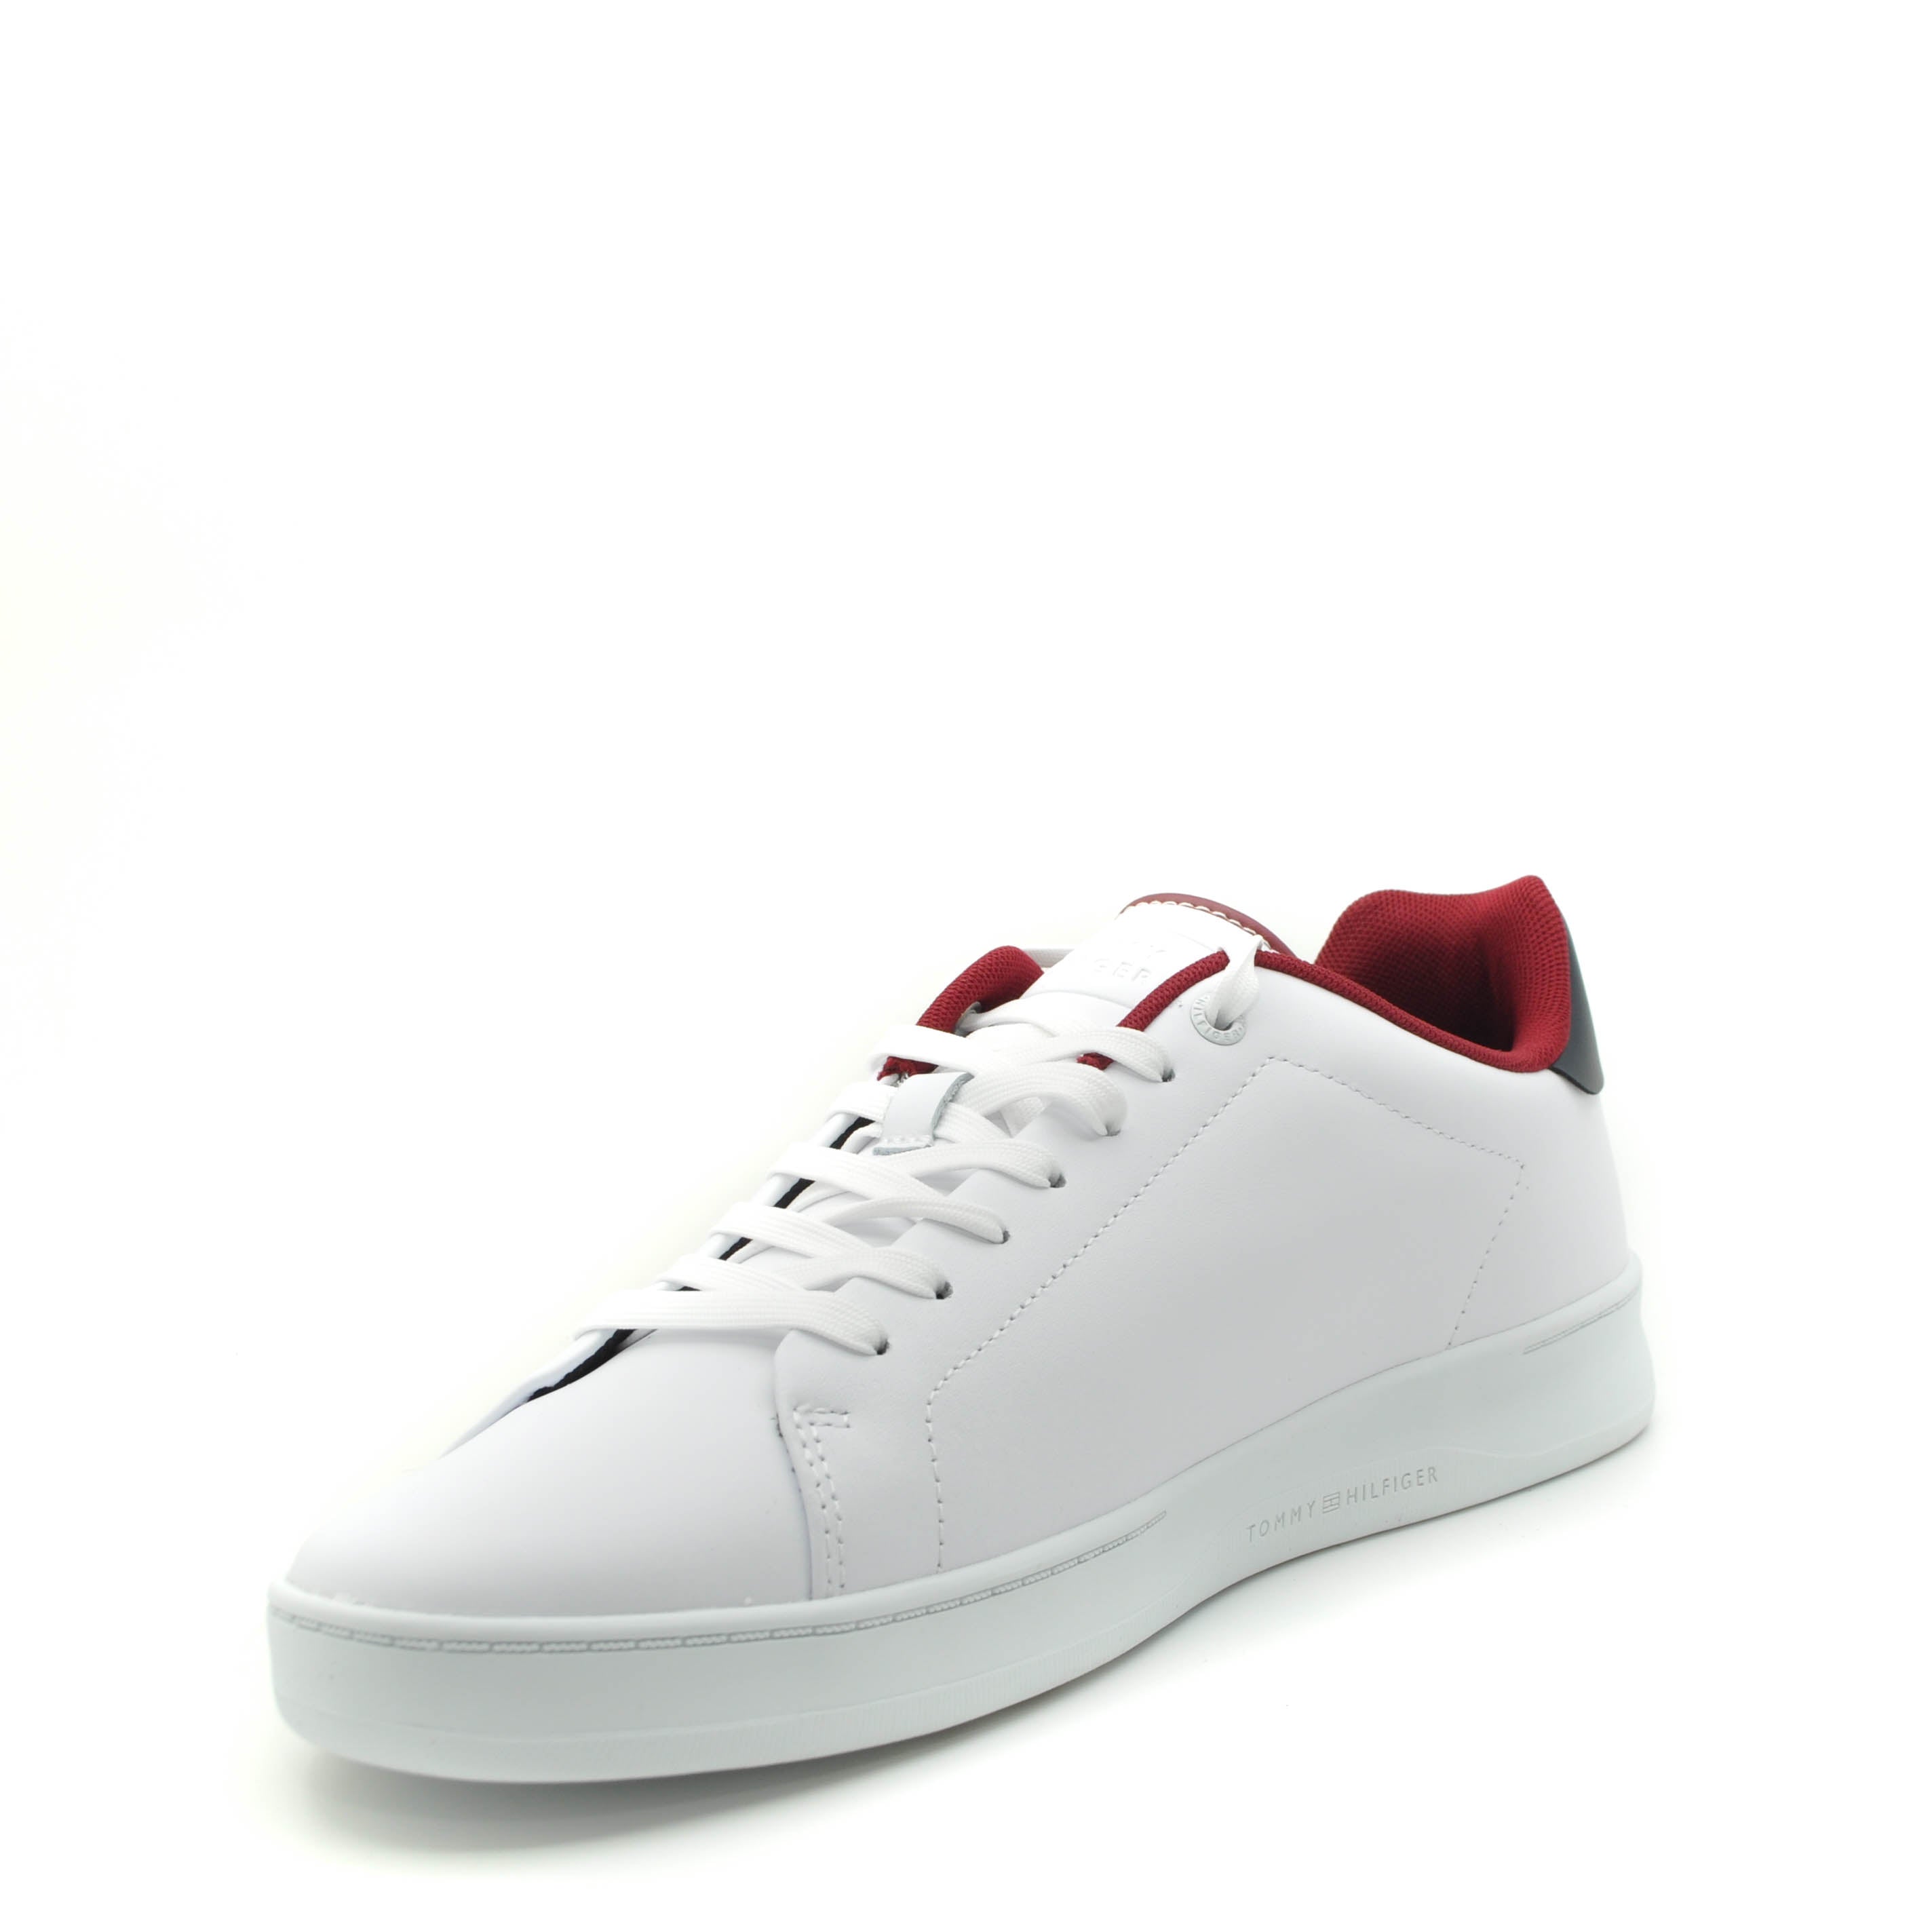 Hilfiger trainers online ireland | white trainers | white shoes